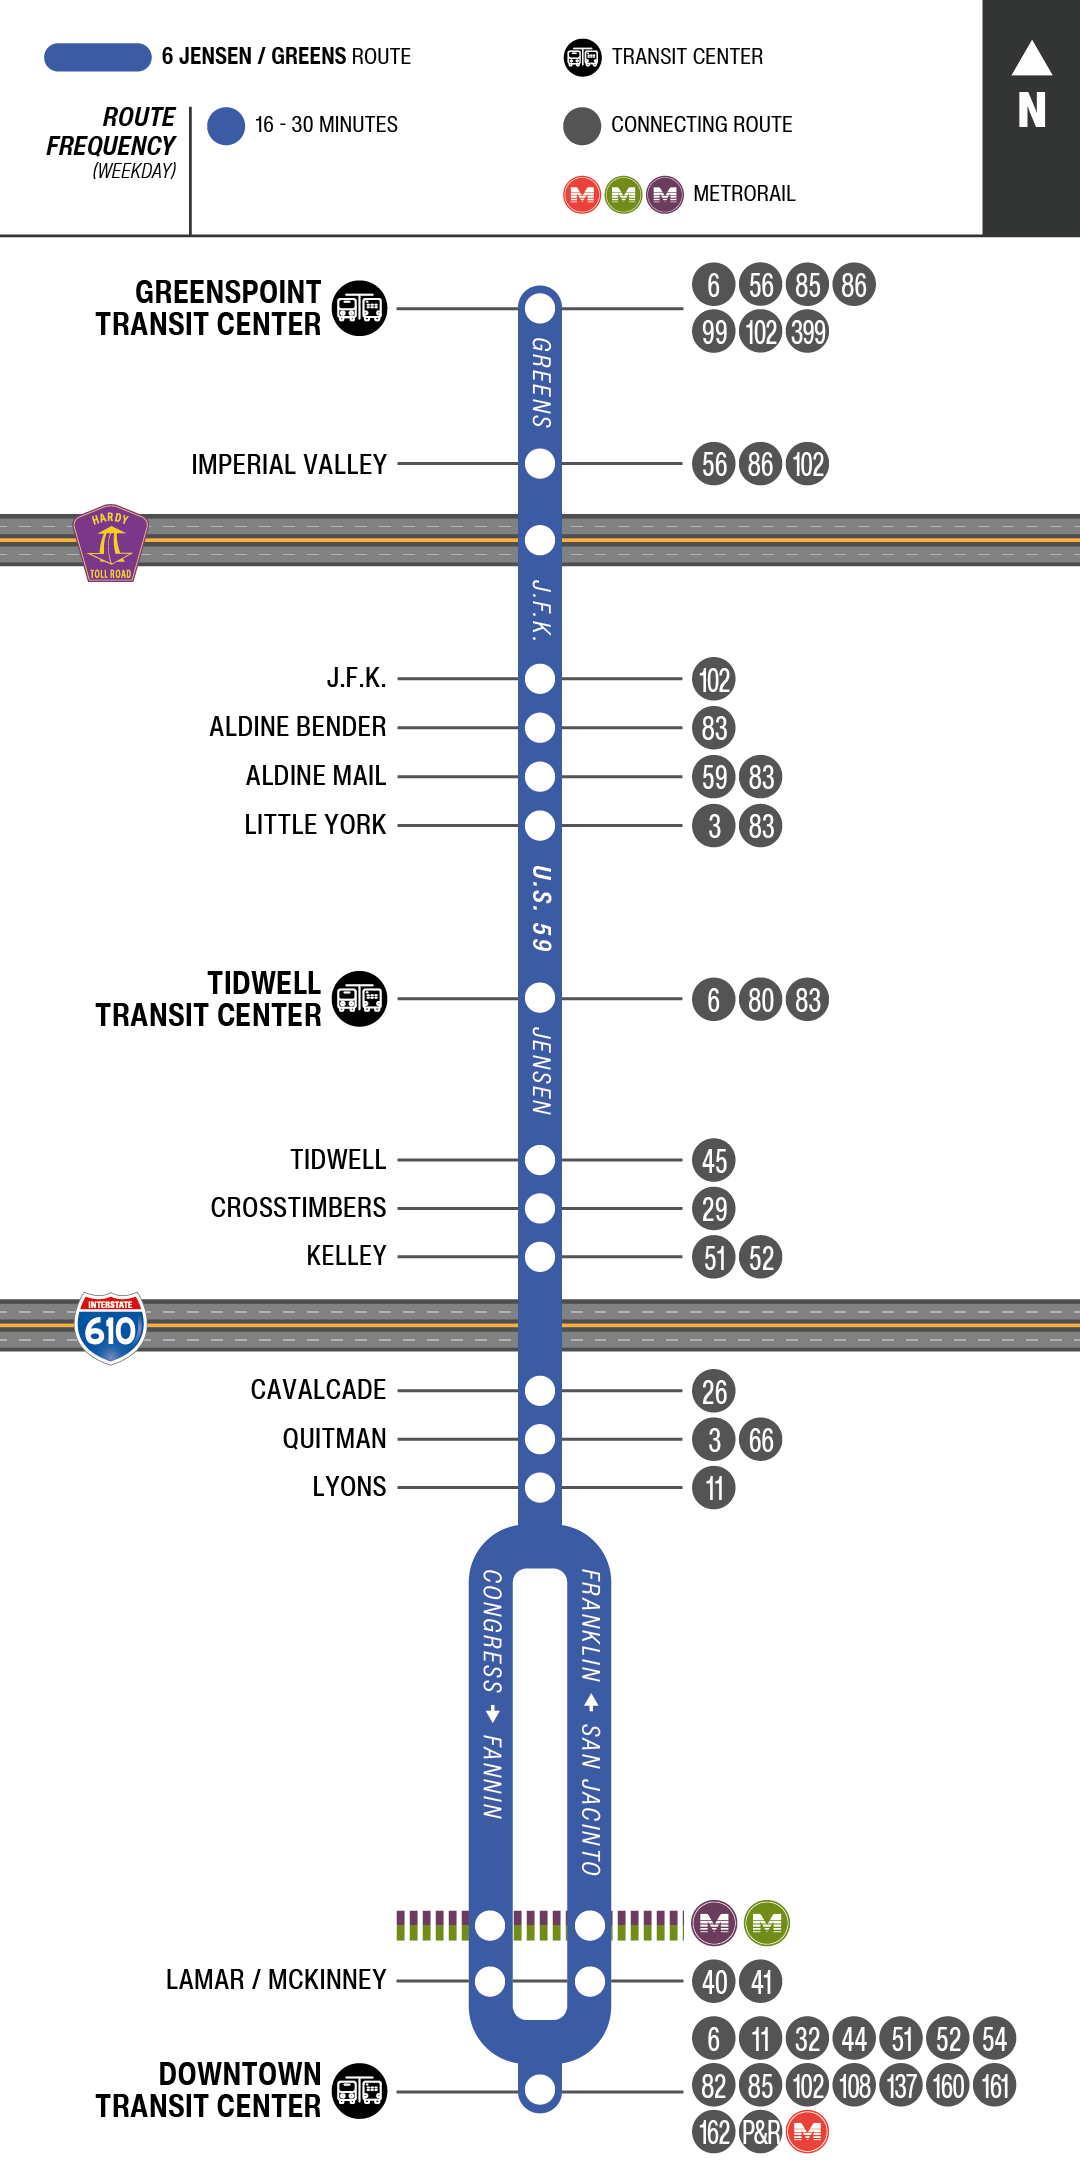 Route map for 6 Jensen / Greens bus